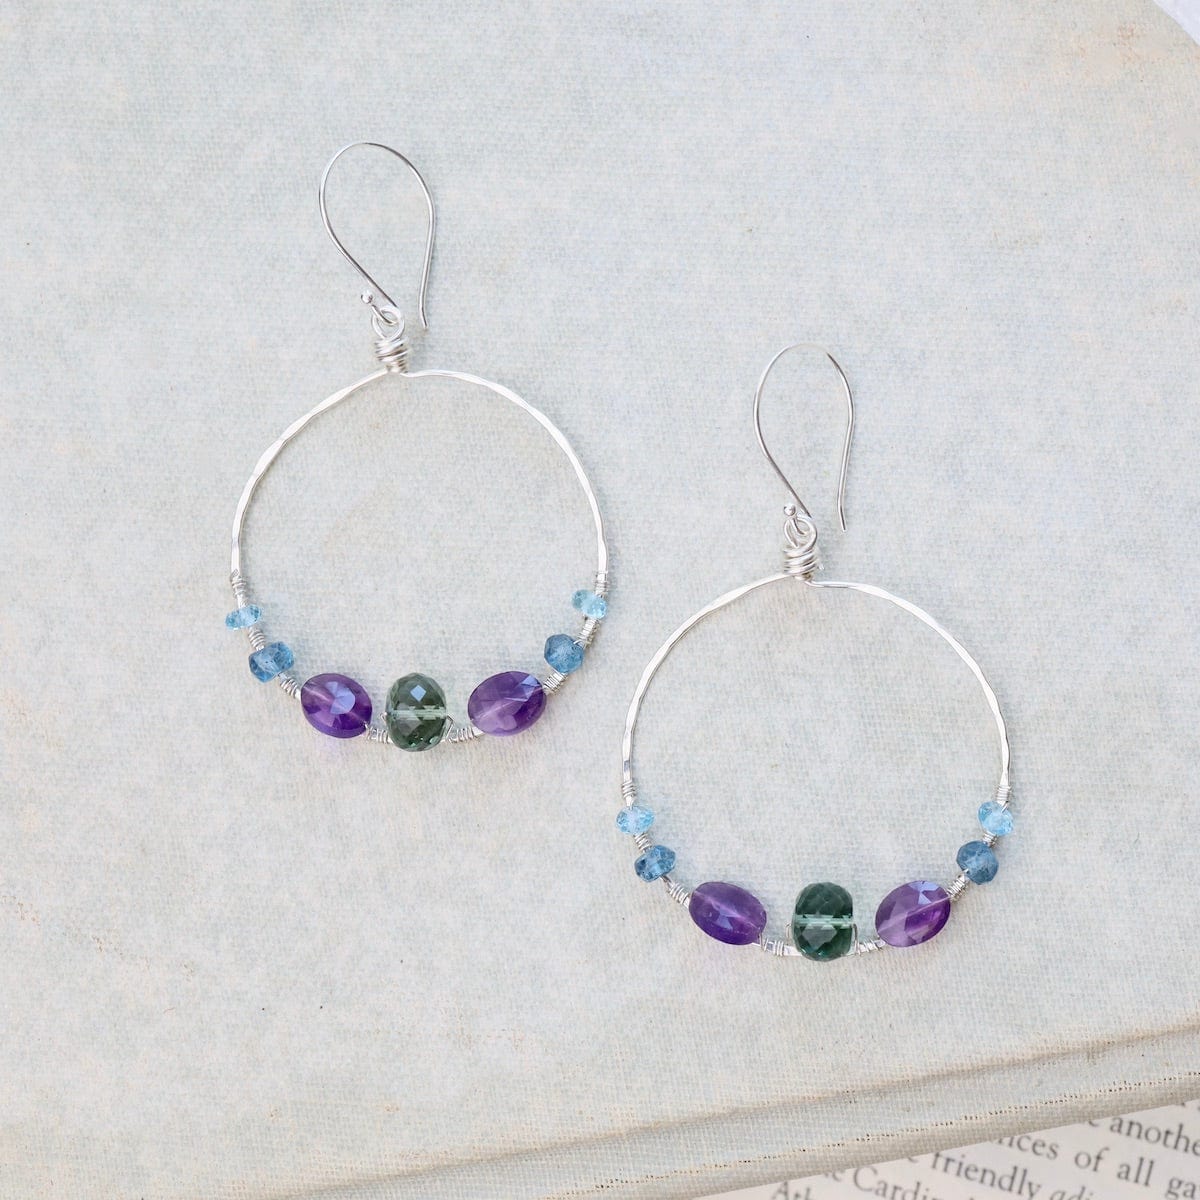 EAR Large Silver Hoop Earrings with Amethyst, Quartz,and Blue Topaz